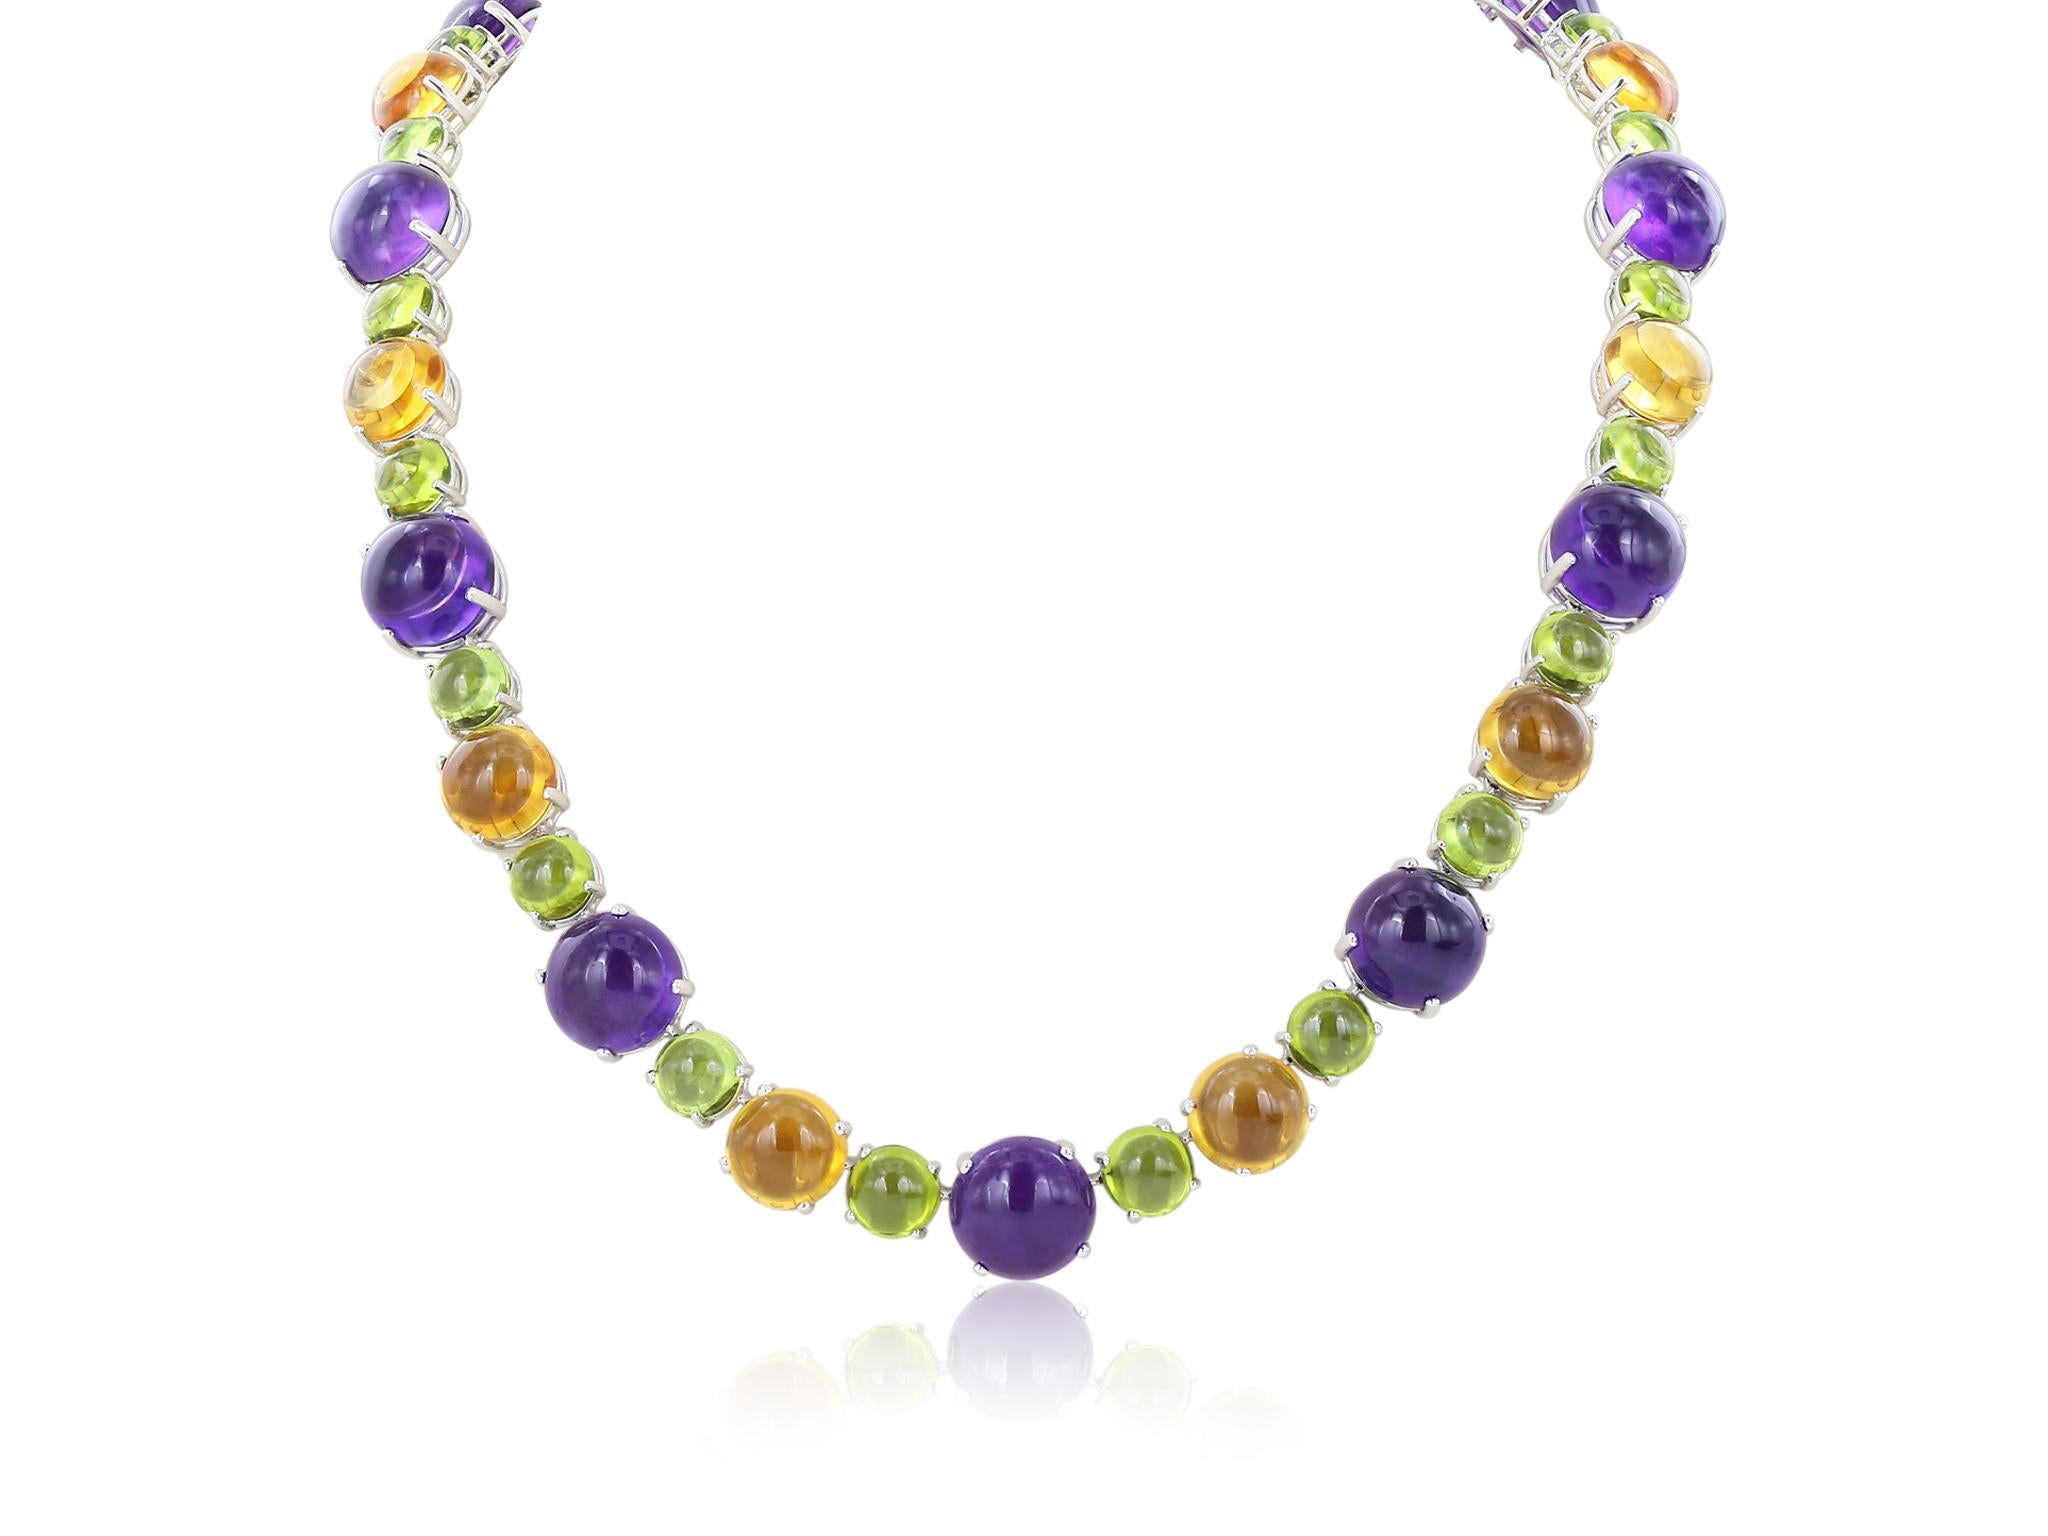 Stunning 18 karat white gold multi color necklace consisting of 20 round amethyst cabochon stones having a total weight of 117.91 carats, 20 round cabochon citrine stones having a total weight of 107.36 carats, and 40 round cabochon peridot stones